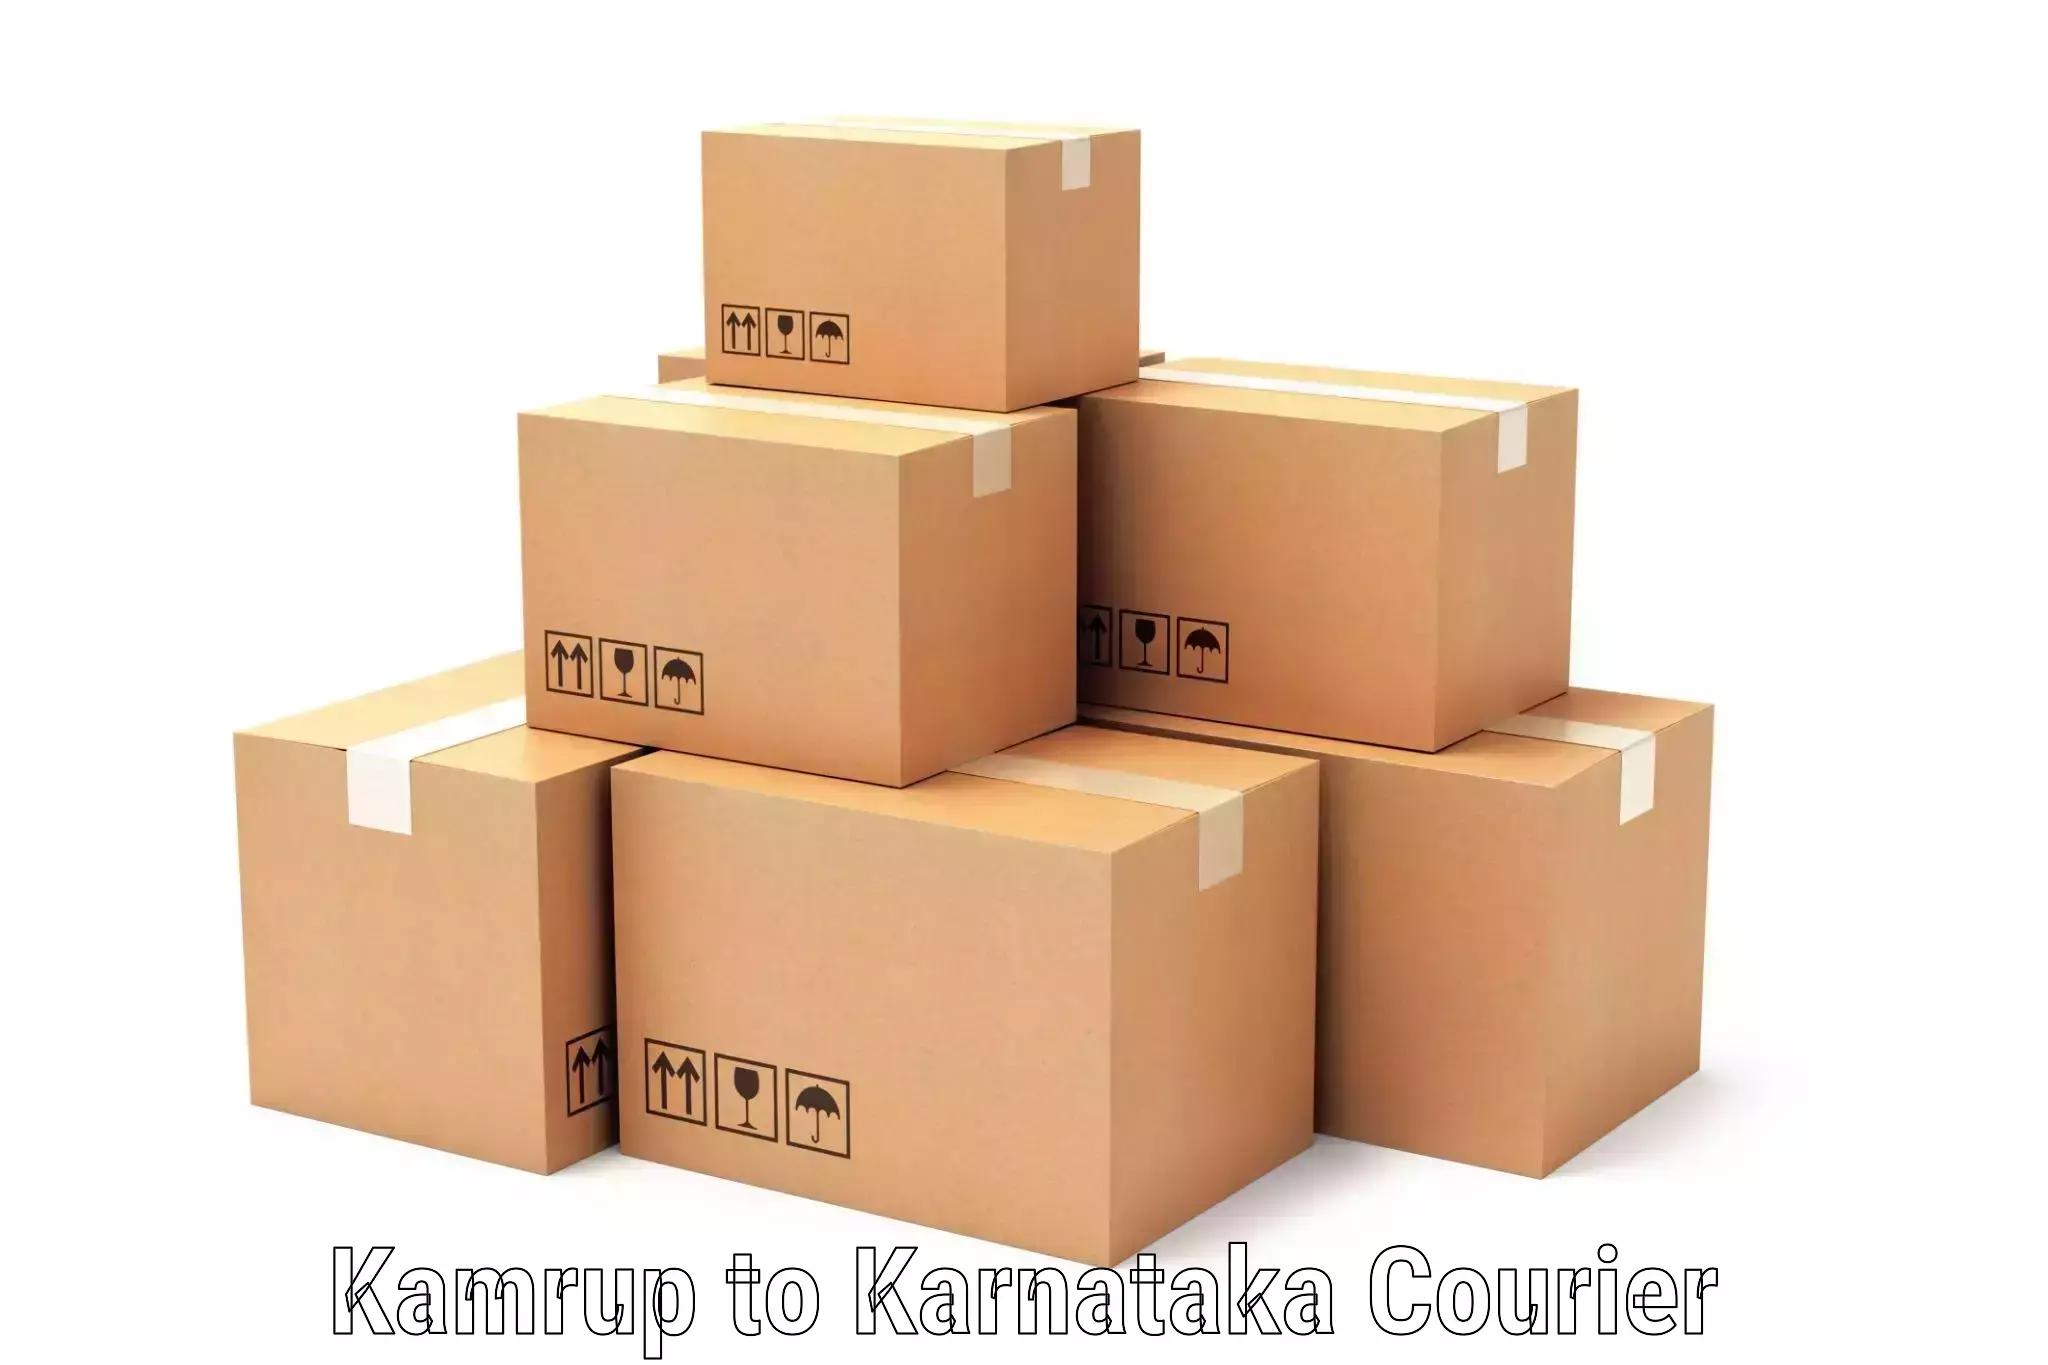 Express delivery capabilities in Kamrup to Mangalore Port